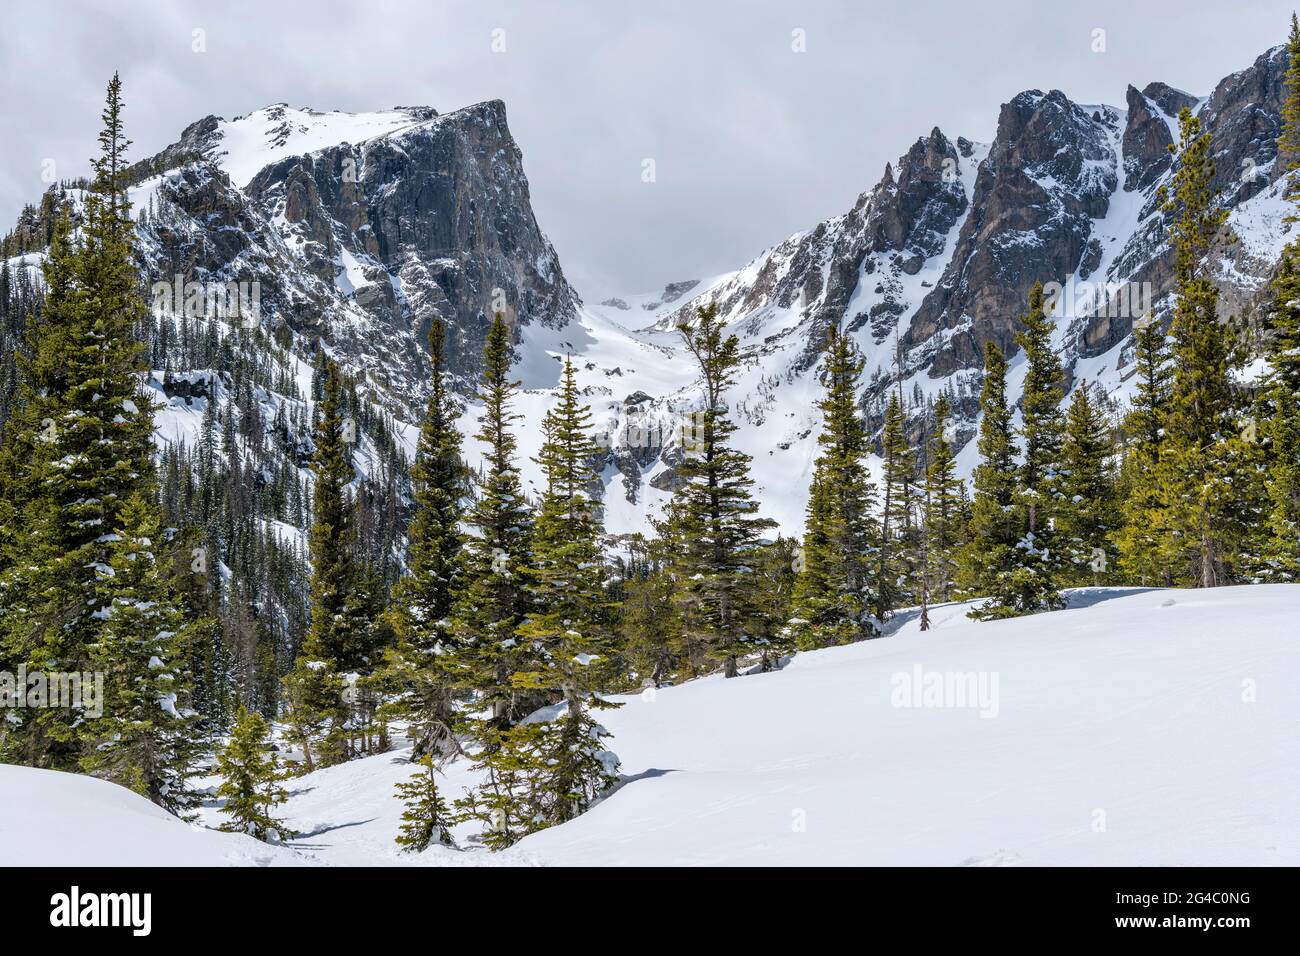 Spring Mountains - A closeup view of Hallett Peak and Flattop Mountain, surrounded by snow and forest, in Rocky Mountain National Park, Colorado, USA. Stock Photo